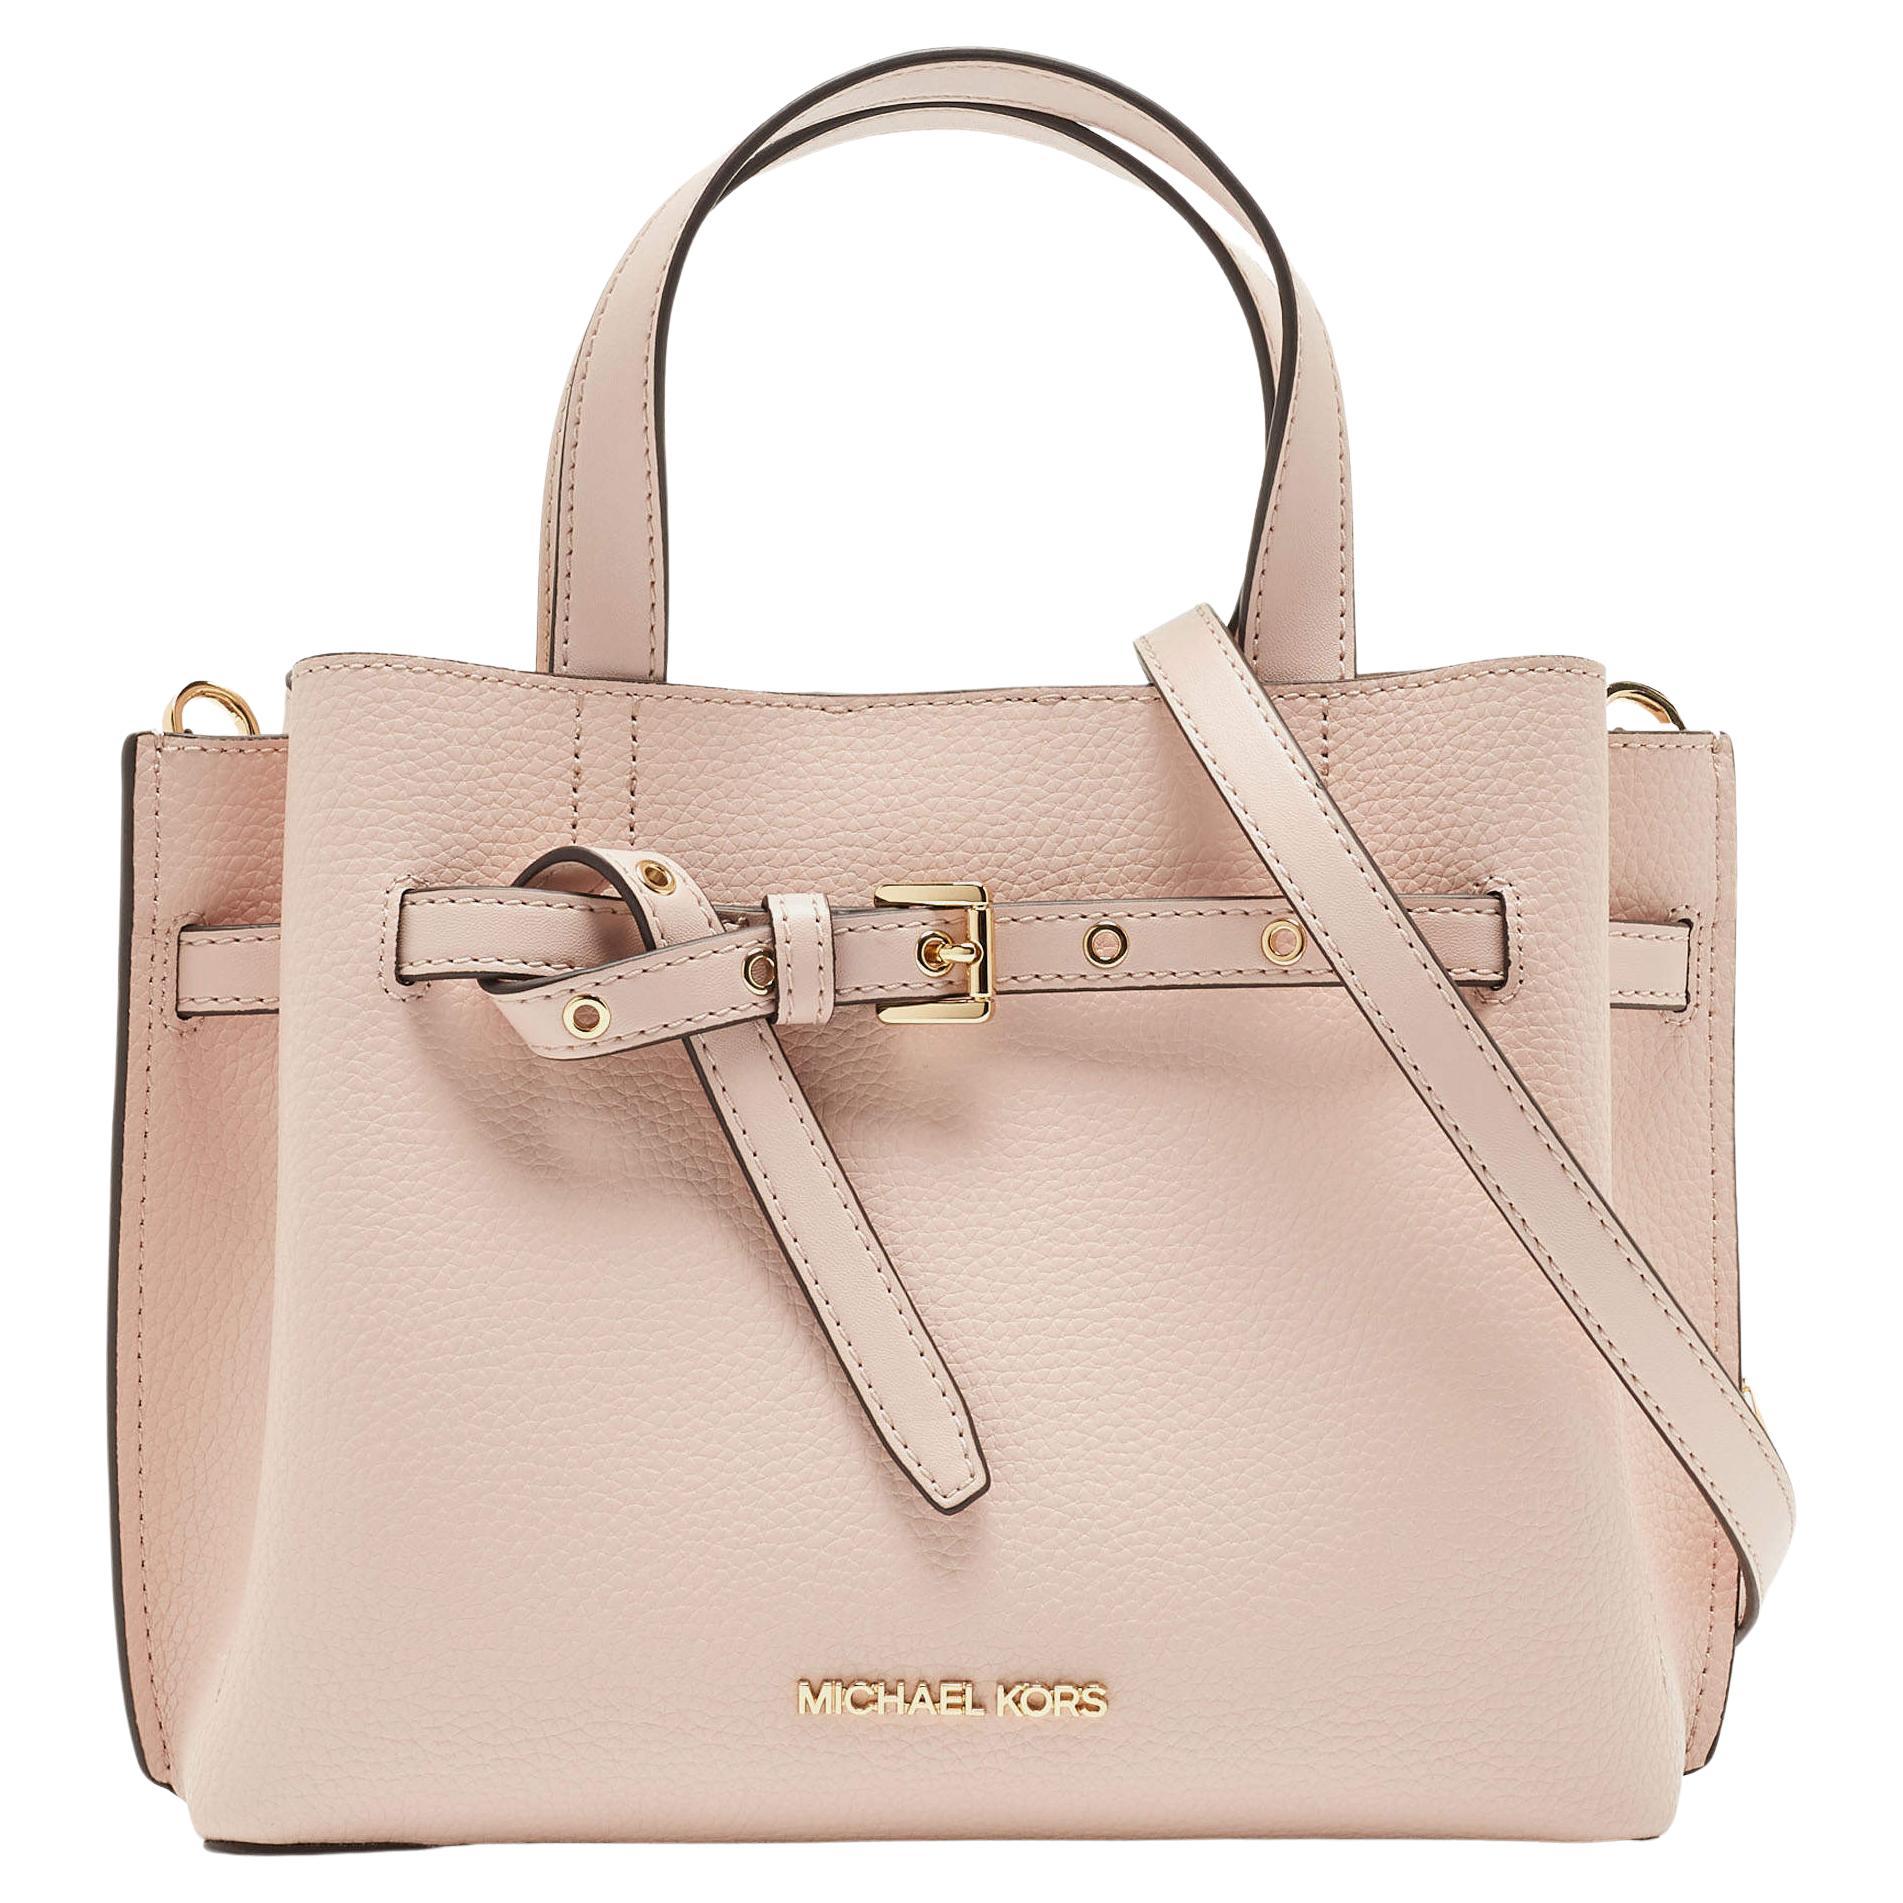 Michael Kors Pink Leather Small Emilia Tote